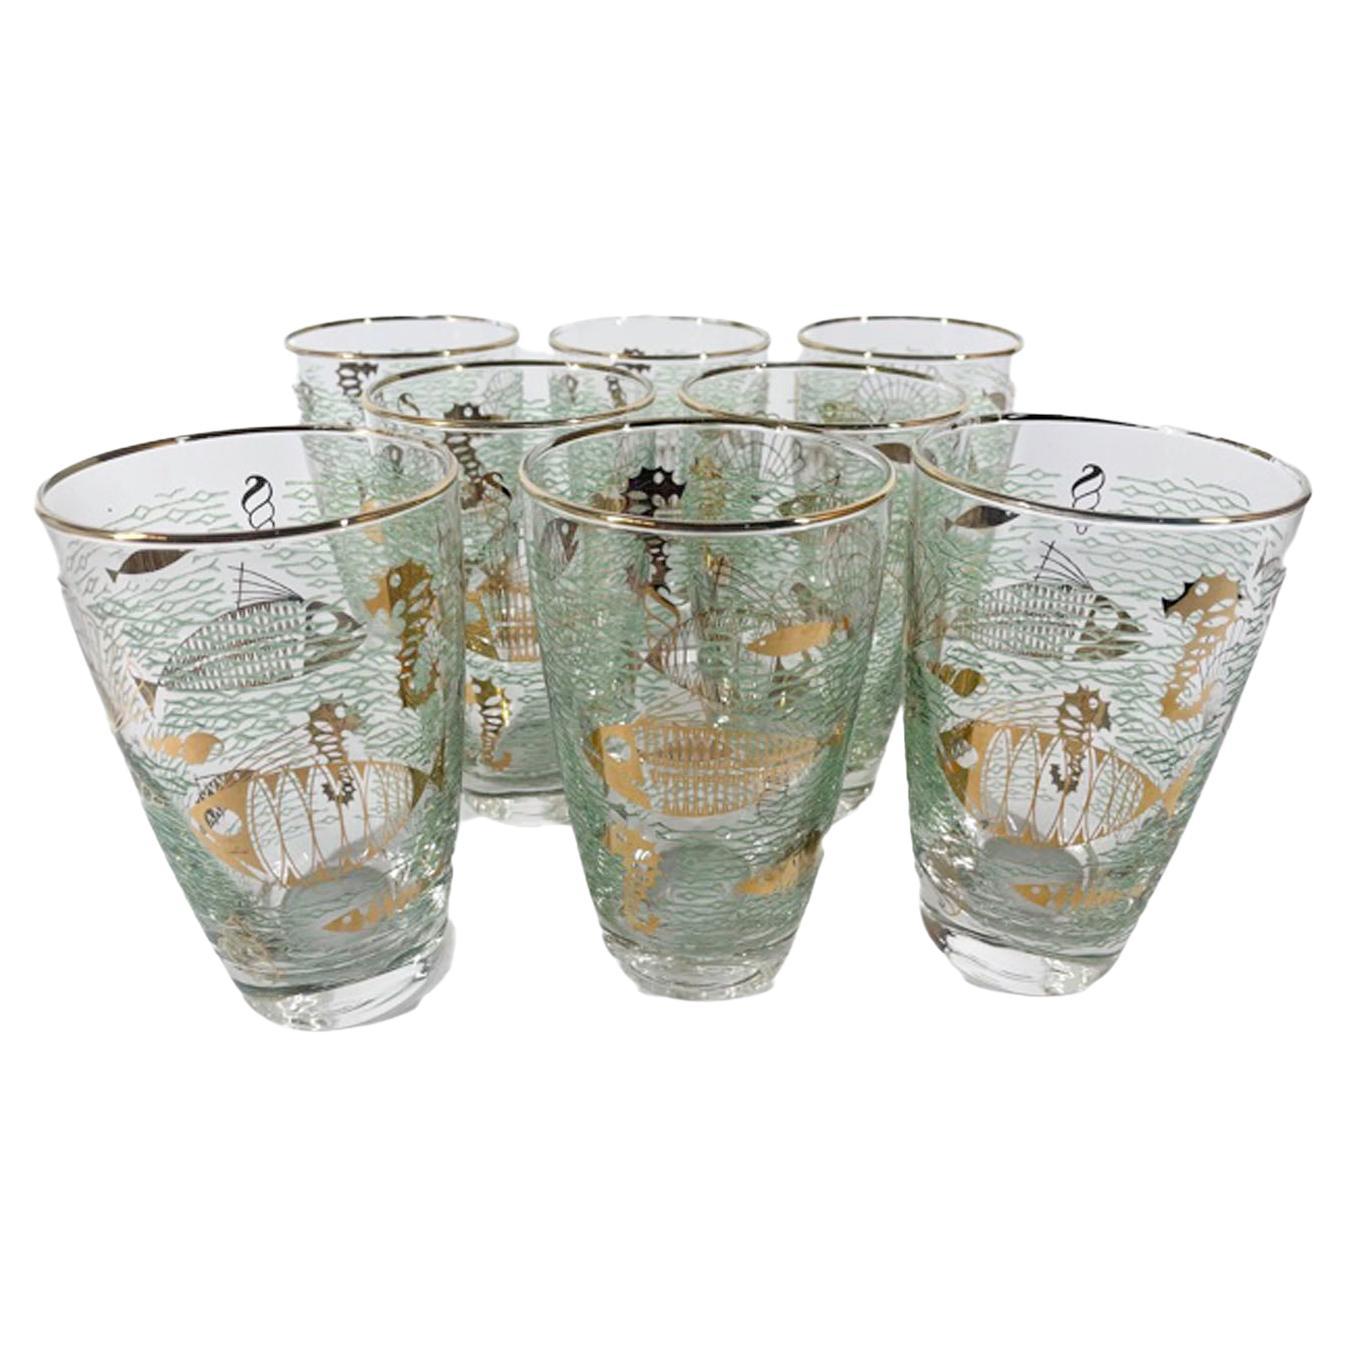 https://a.1stdibscdn.com/vintage-libbey-glassware-marine-life-cocktail-glasses-in-the-atomic-style-for-sale/f_13752/f_270706721643143824243/f_27070672_1643143824632_bg_processed.jpg